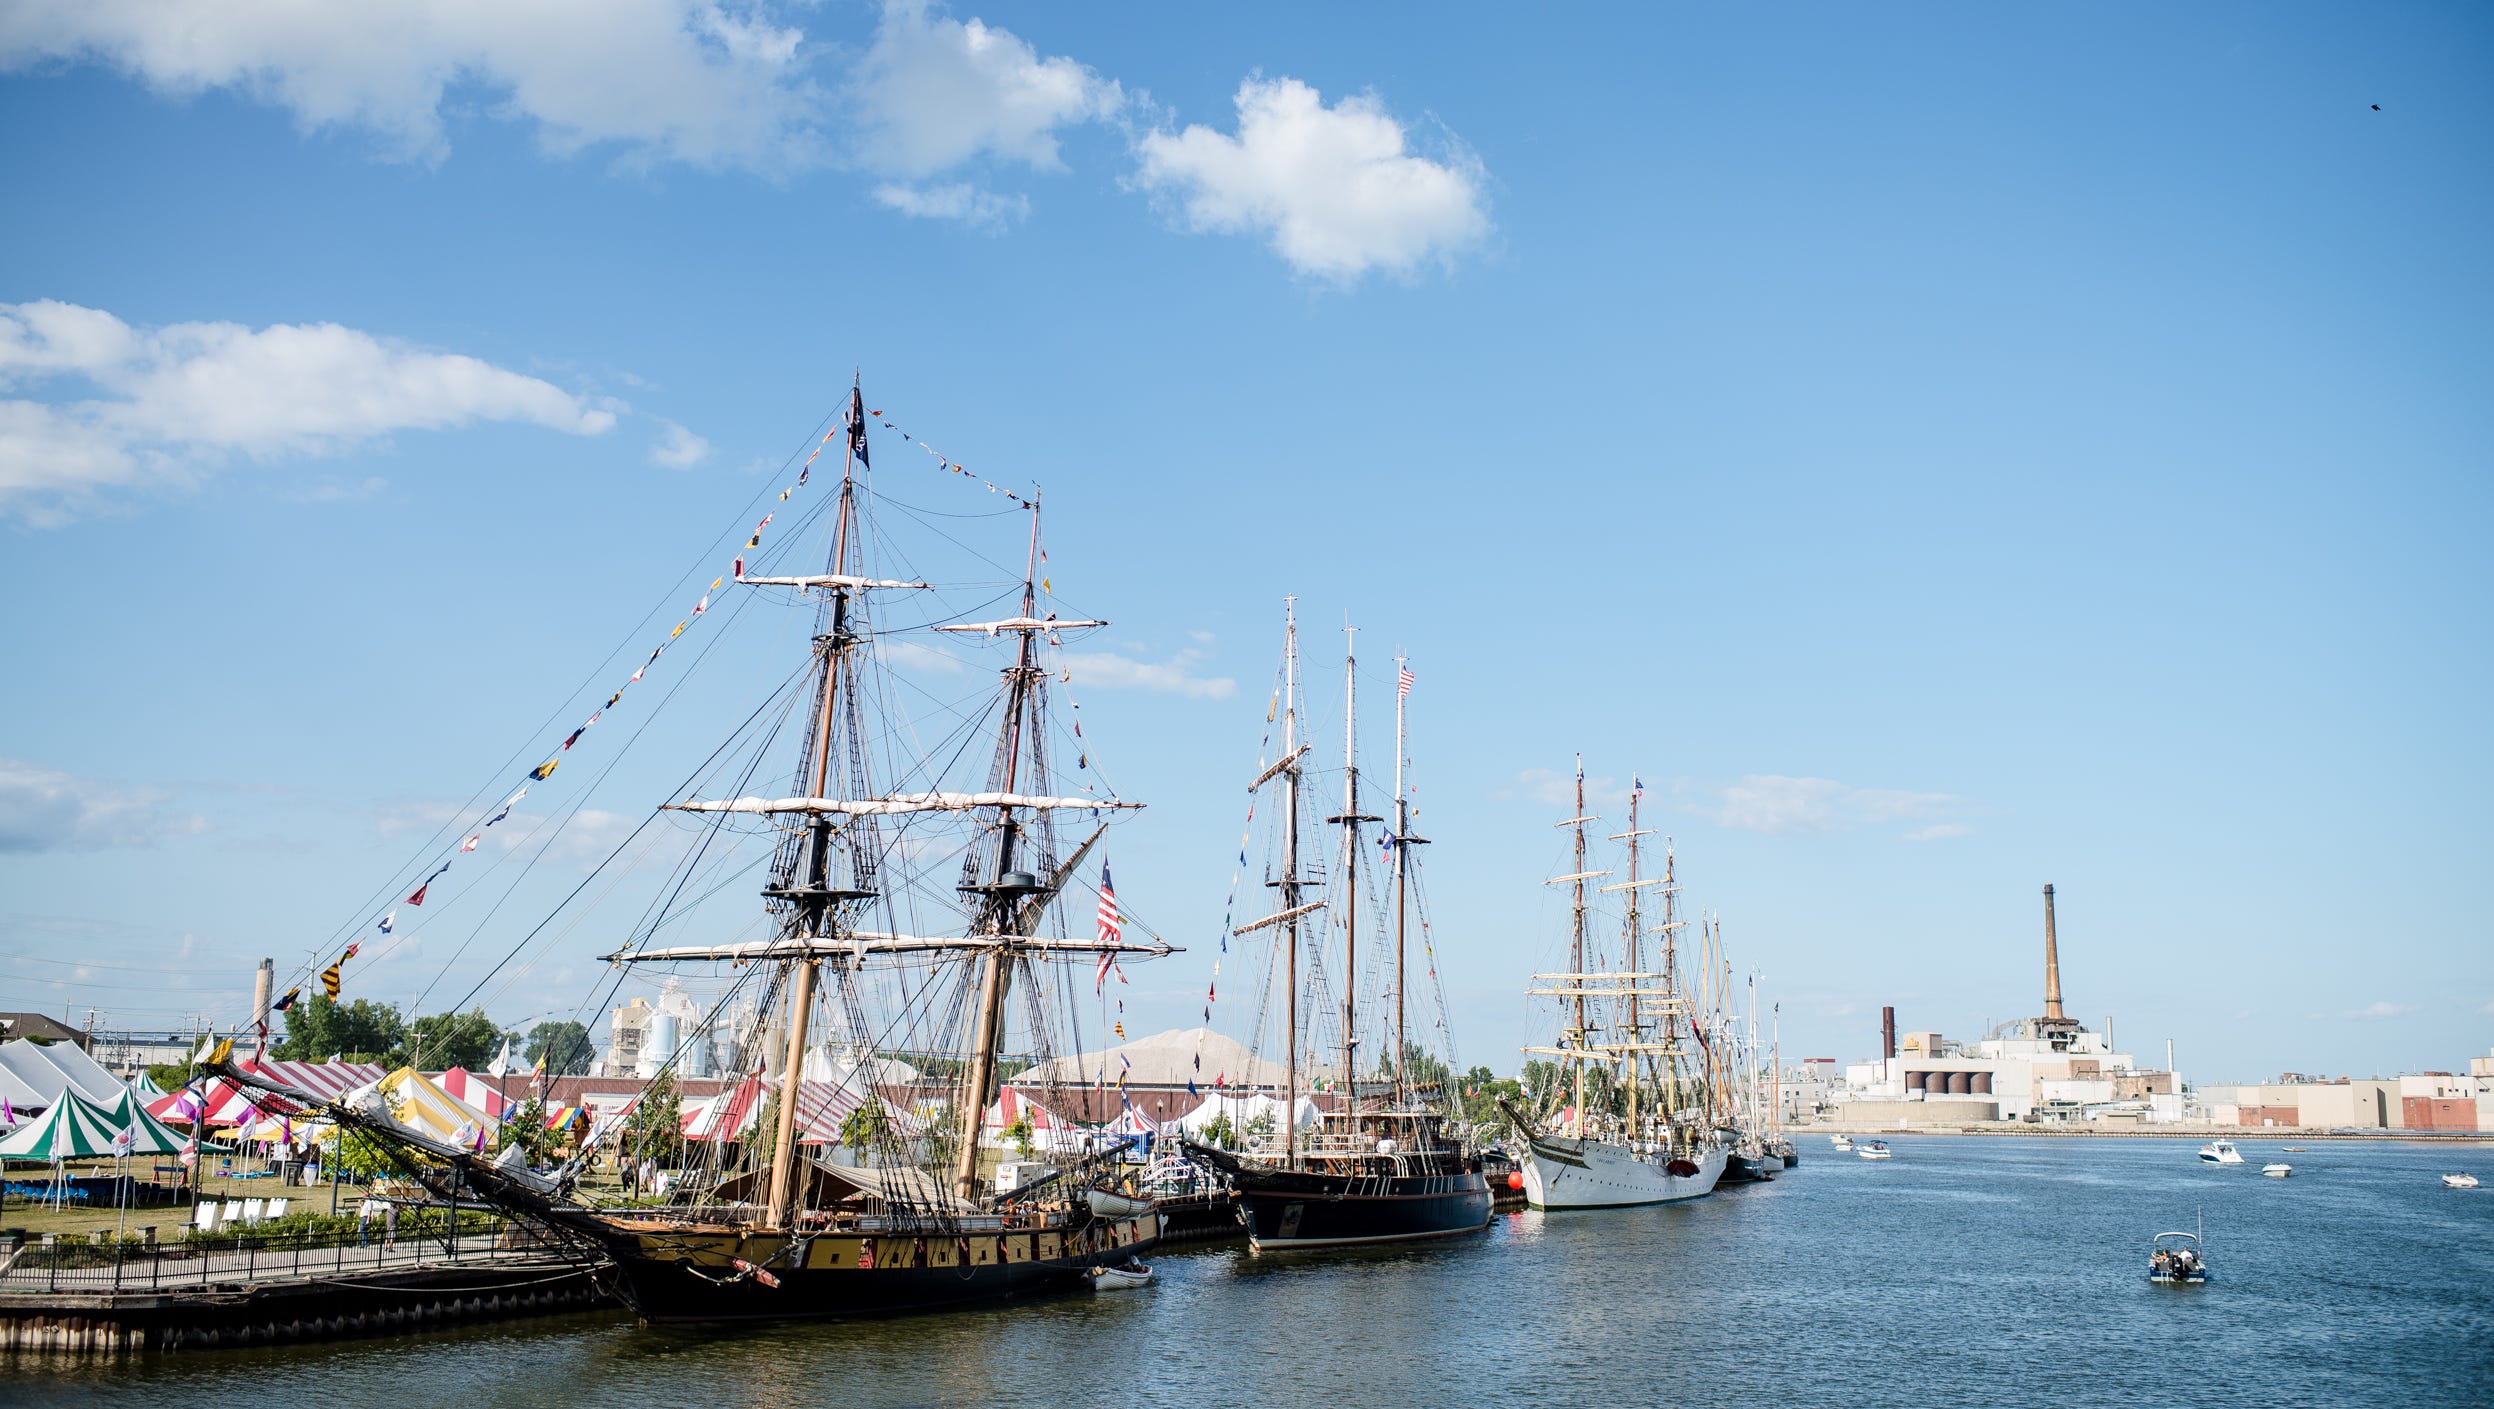 Green Bay Tall Ships Festival to make return voyage in 2019